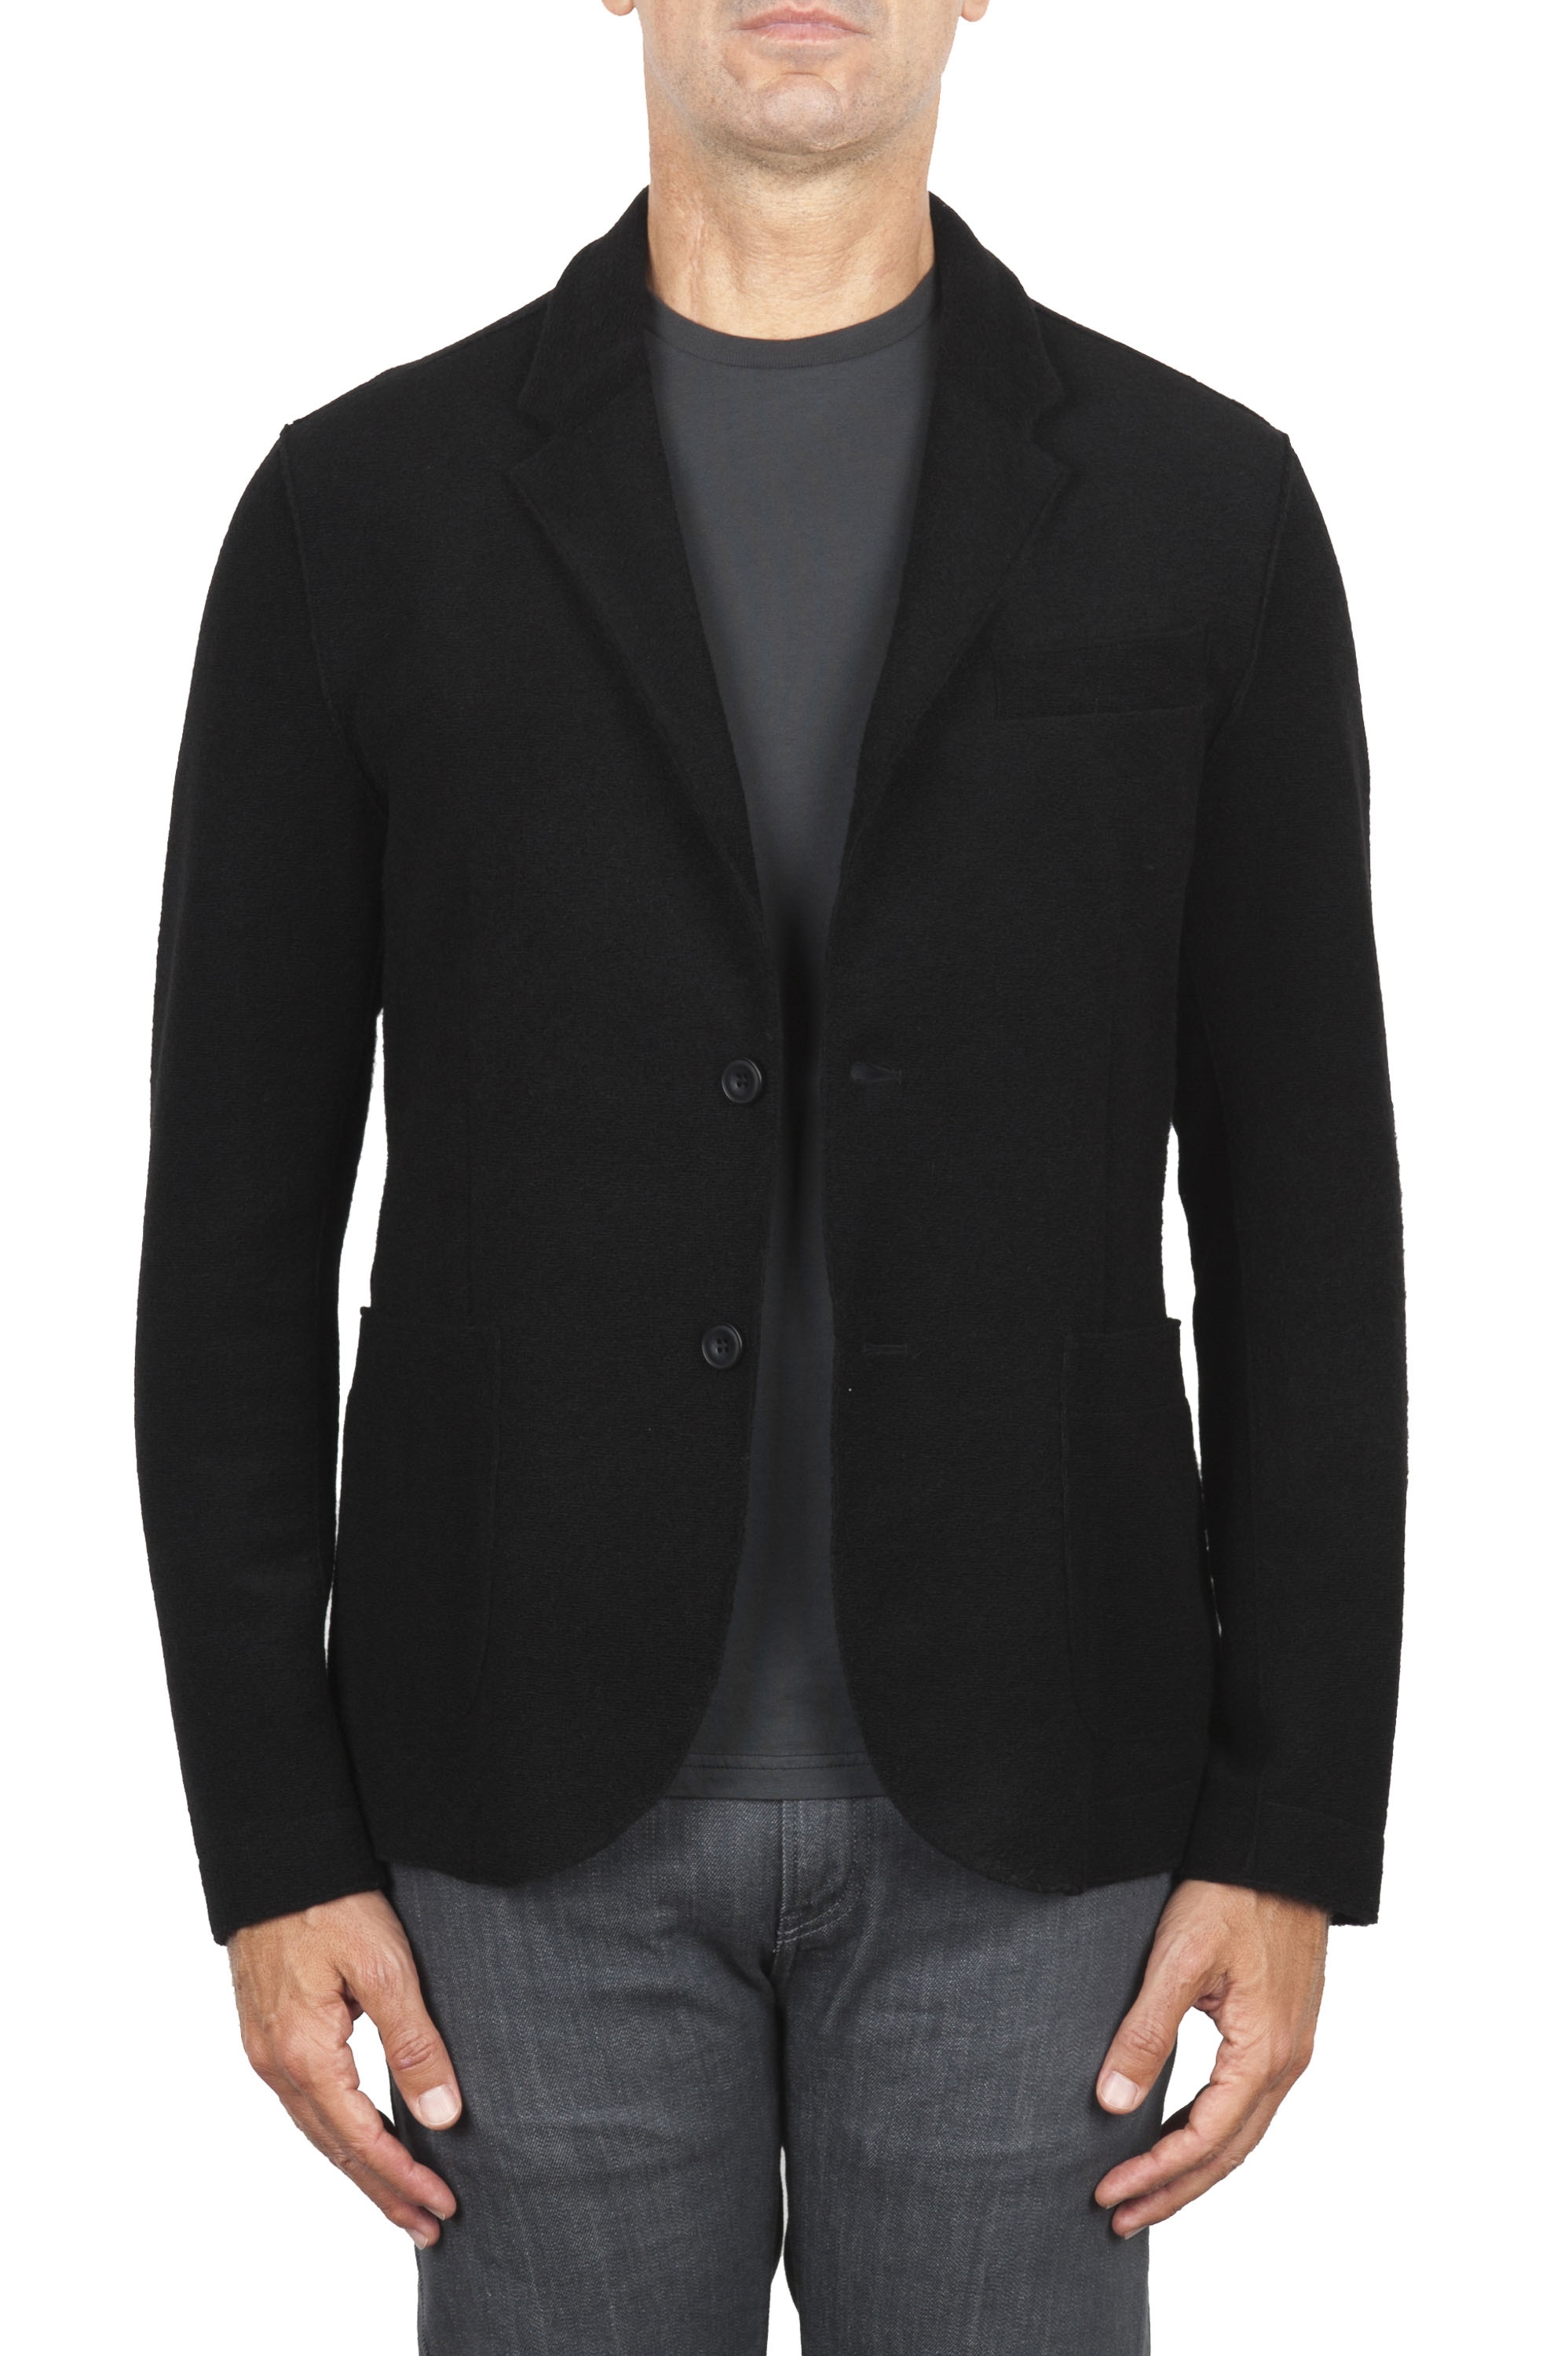 SBU 04572_23AW Black wool blend sport jacket unconstructed and unlined 01